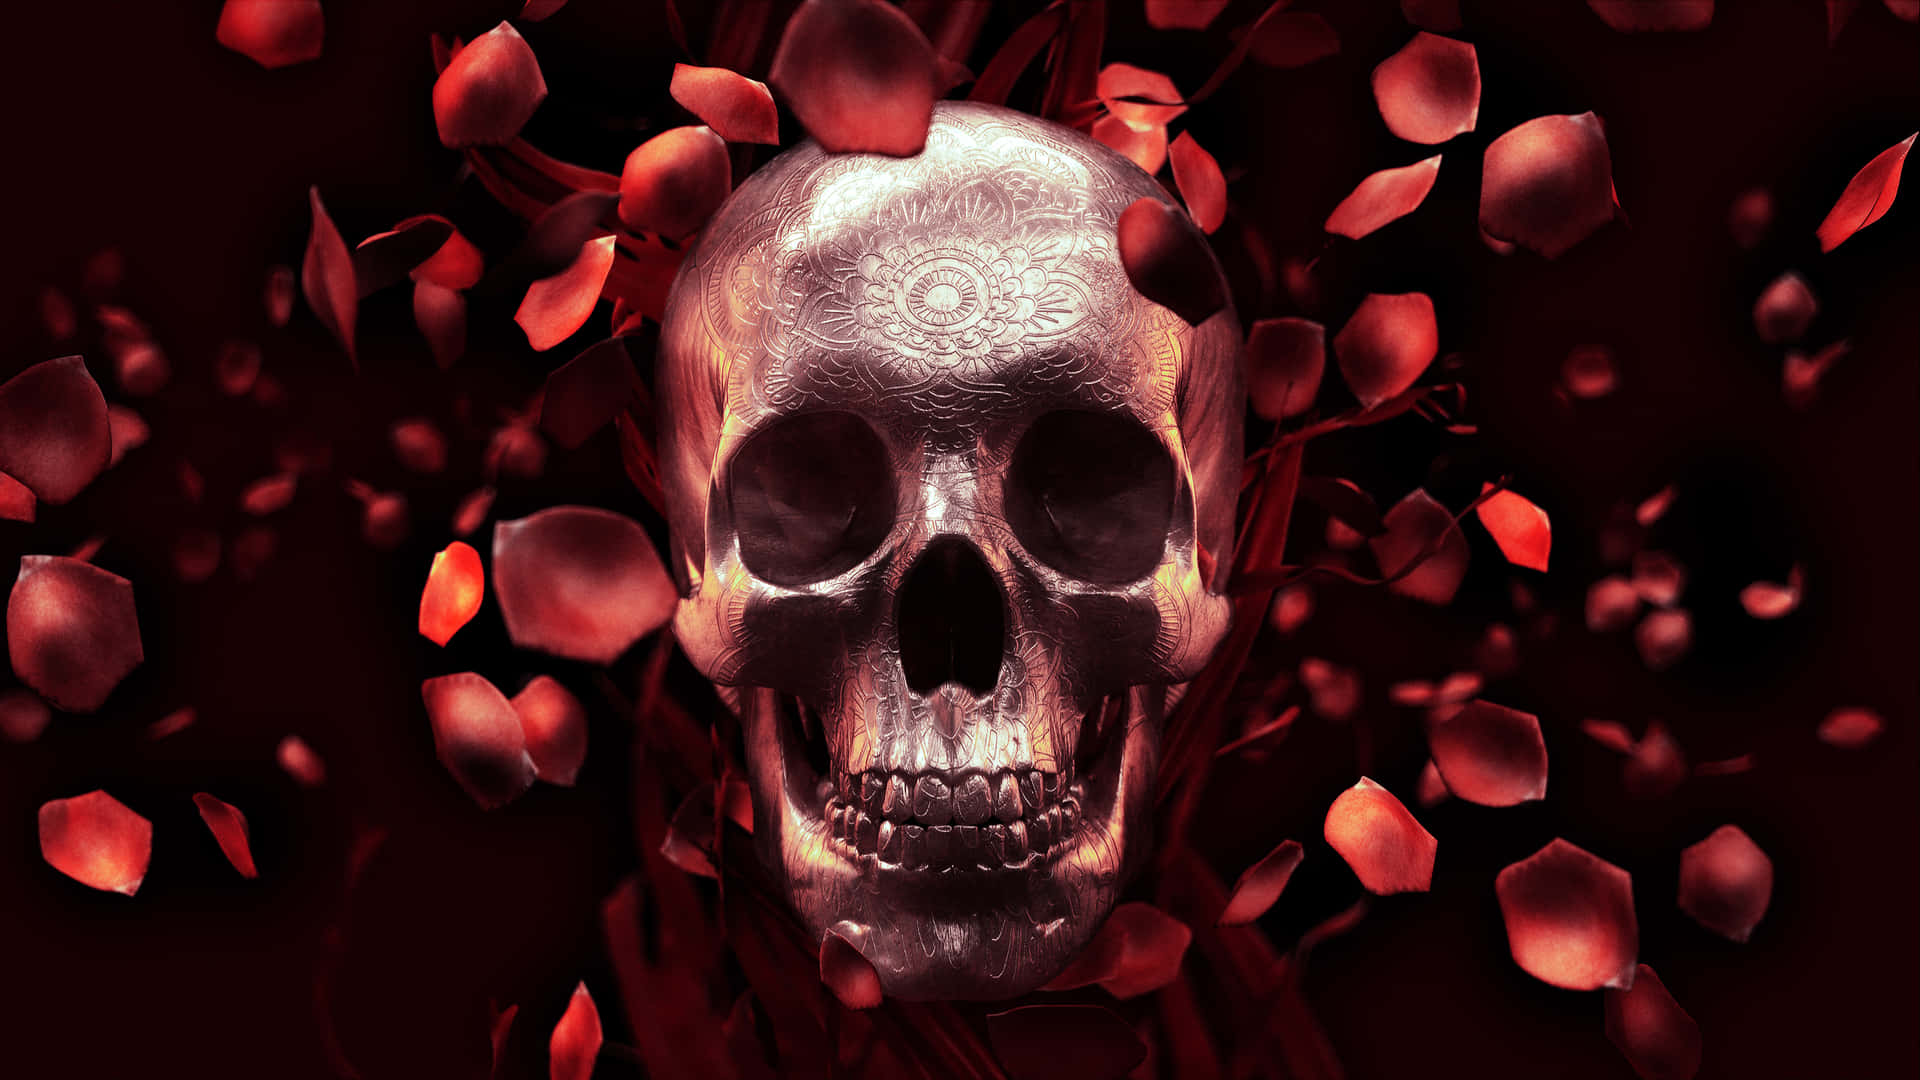 1440p Skull With Petals Background